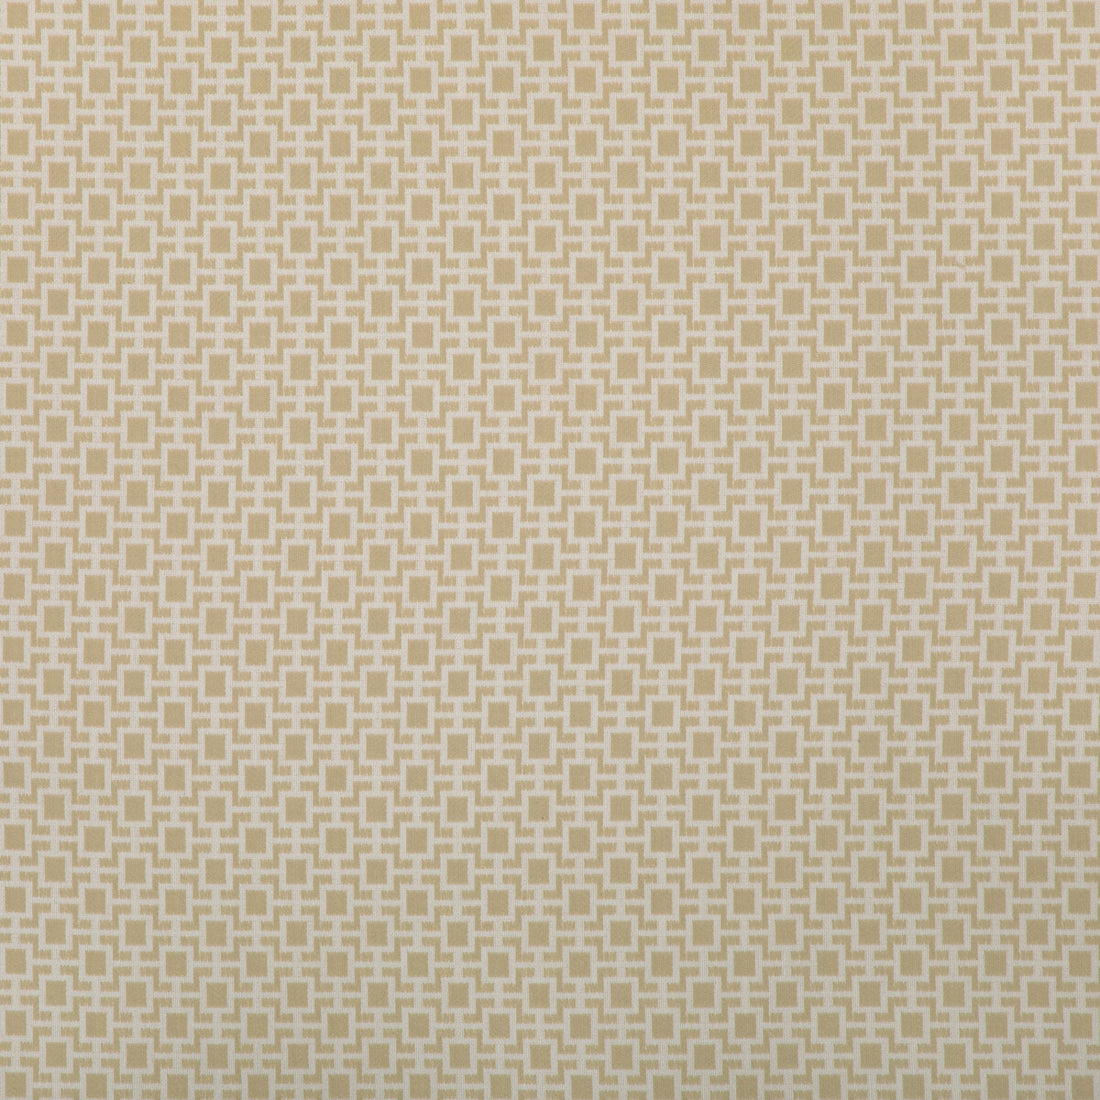 Kravet Design fabric in 36875-116 color - pattern 36875.116.0 - by Kravet Design in the Insideout Seaqual Initiative collection